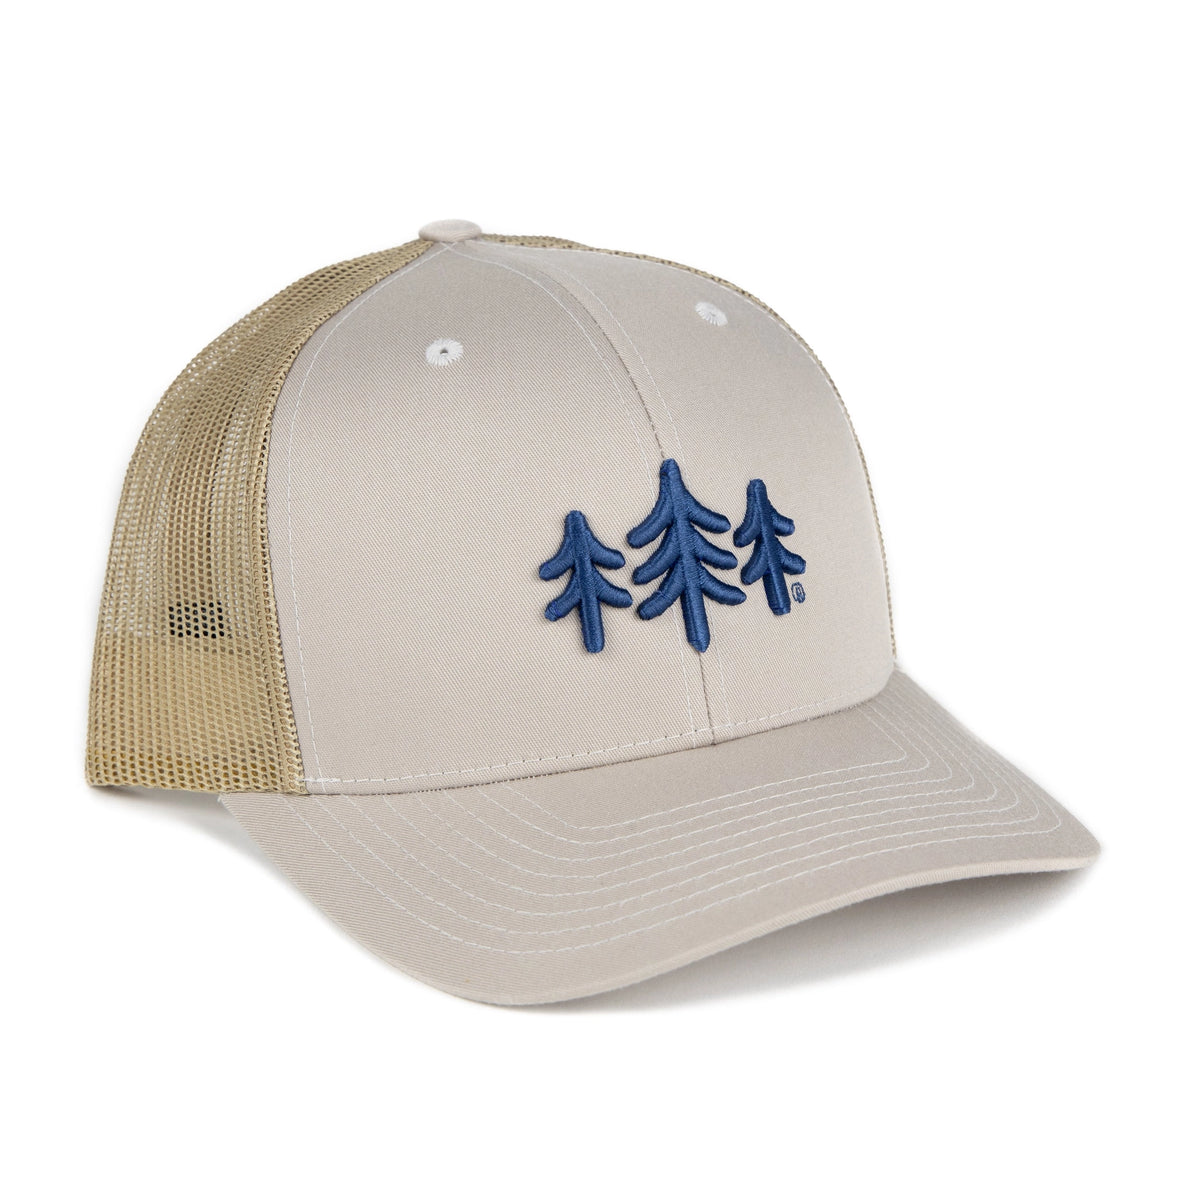 INTO THE PINES PATCH HAT, KHAKI